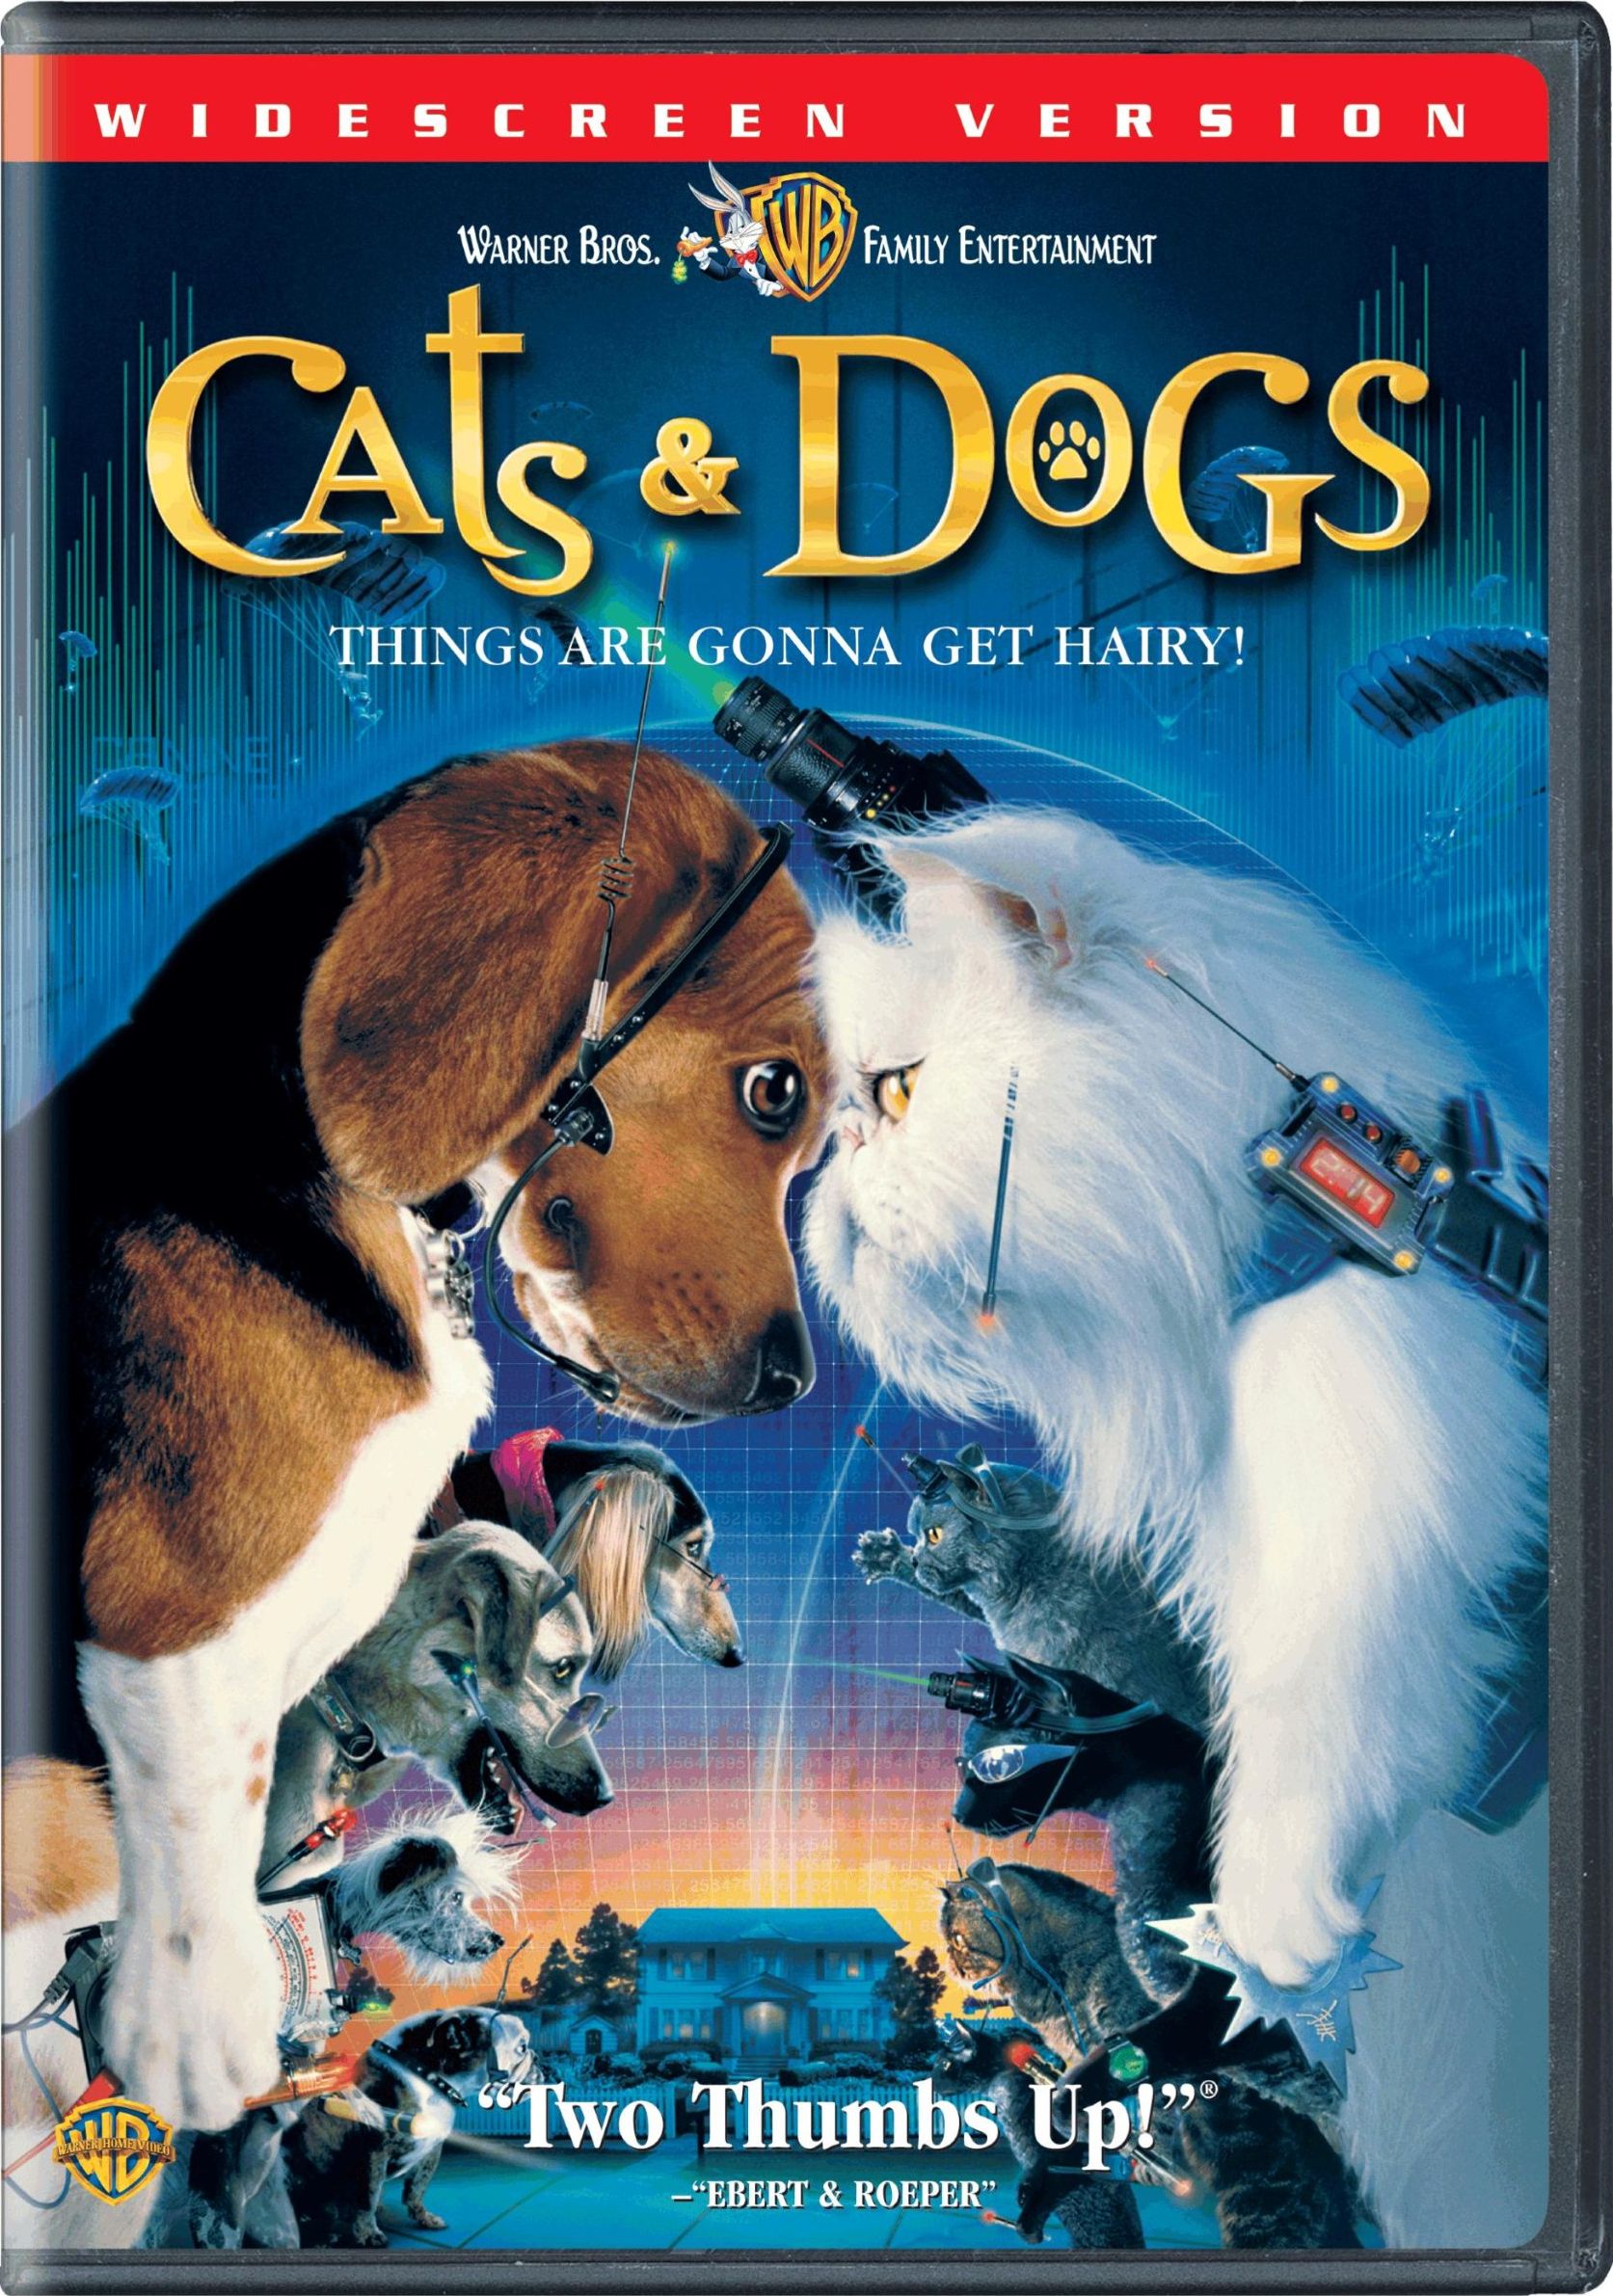 Cats & Dogs DVD Release Date